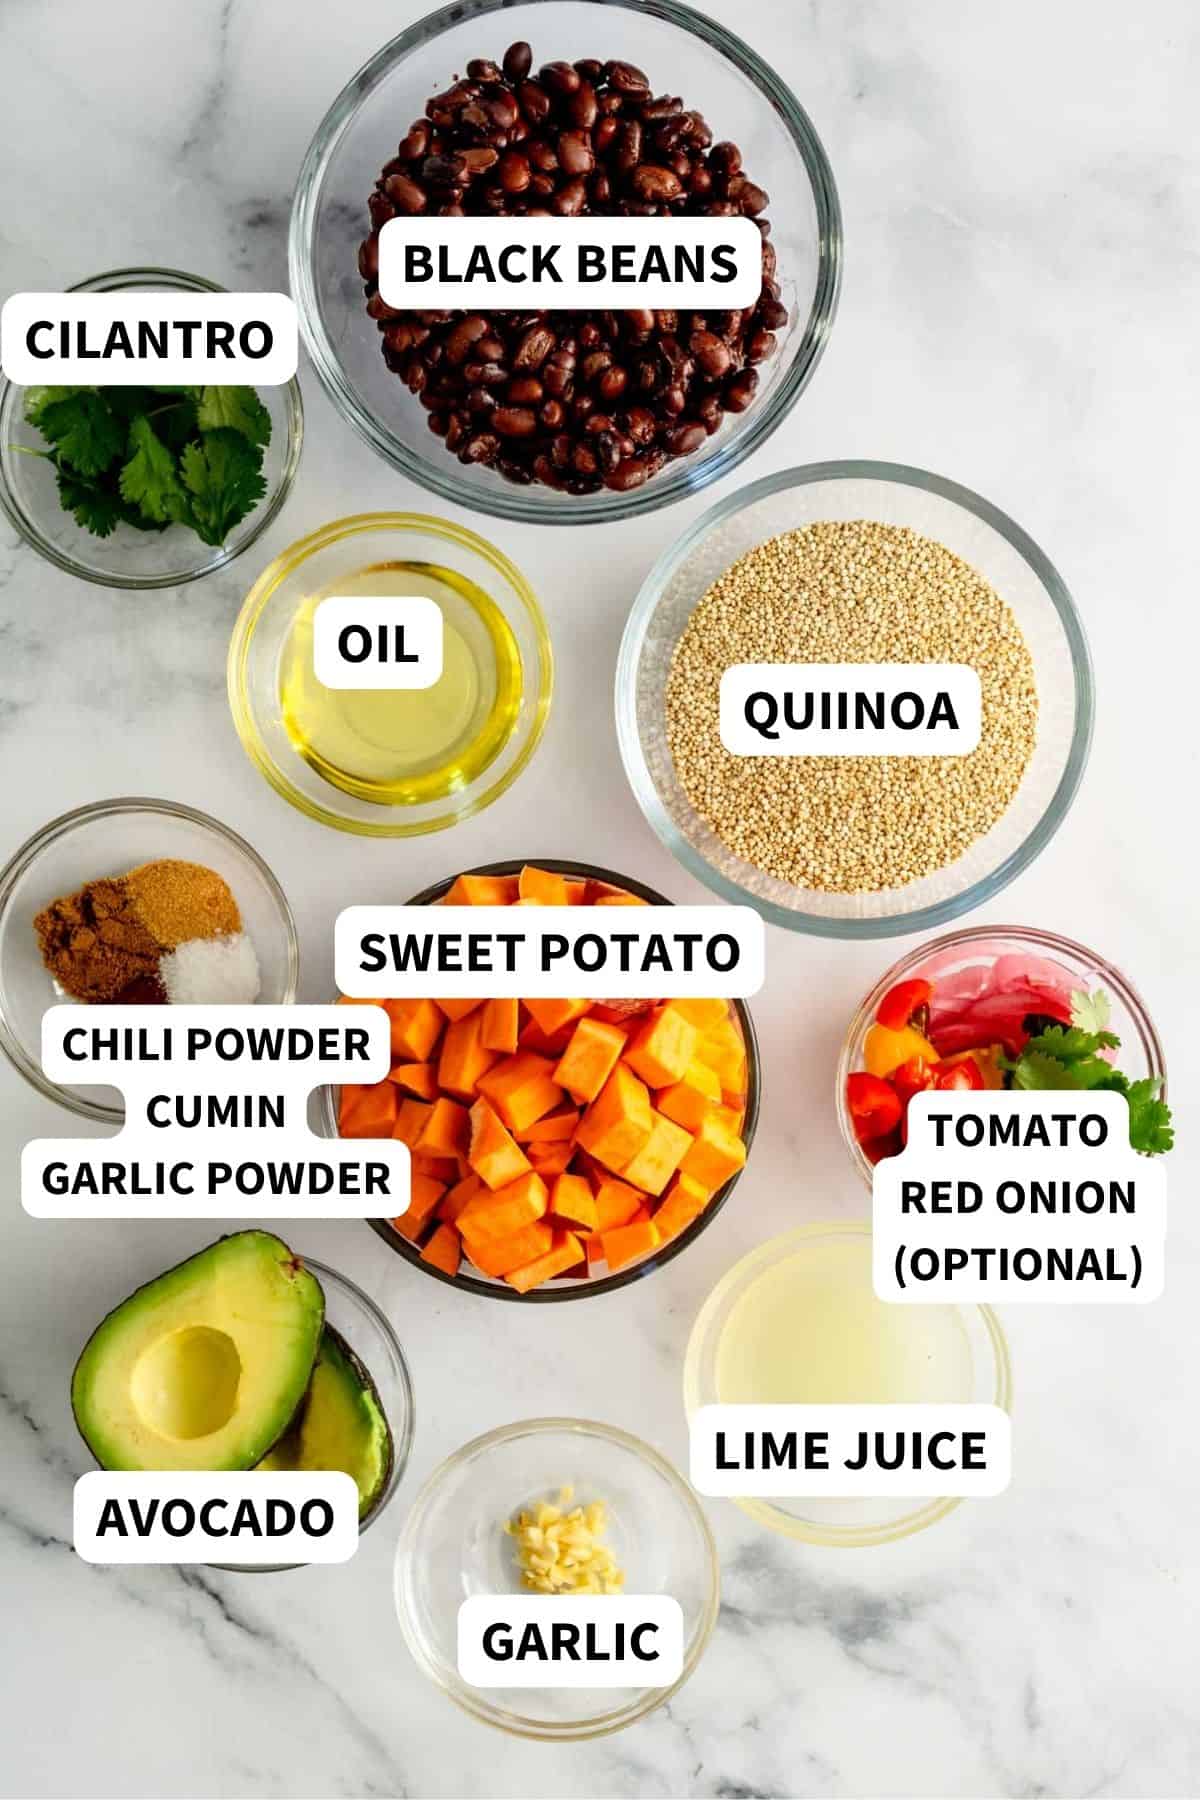 Labeled ingredients to make quinoa bowls.